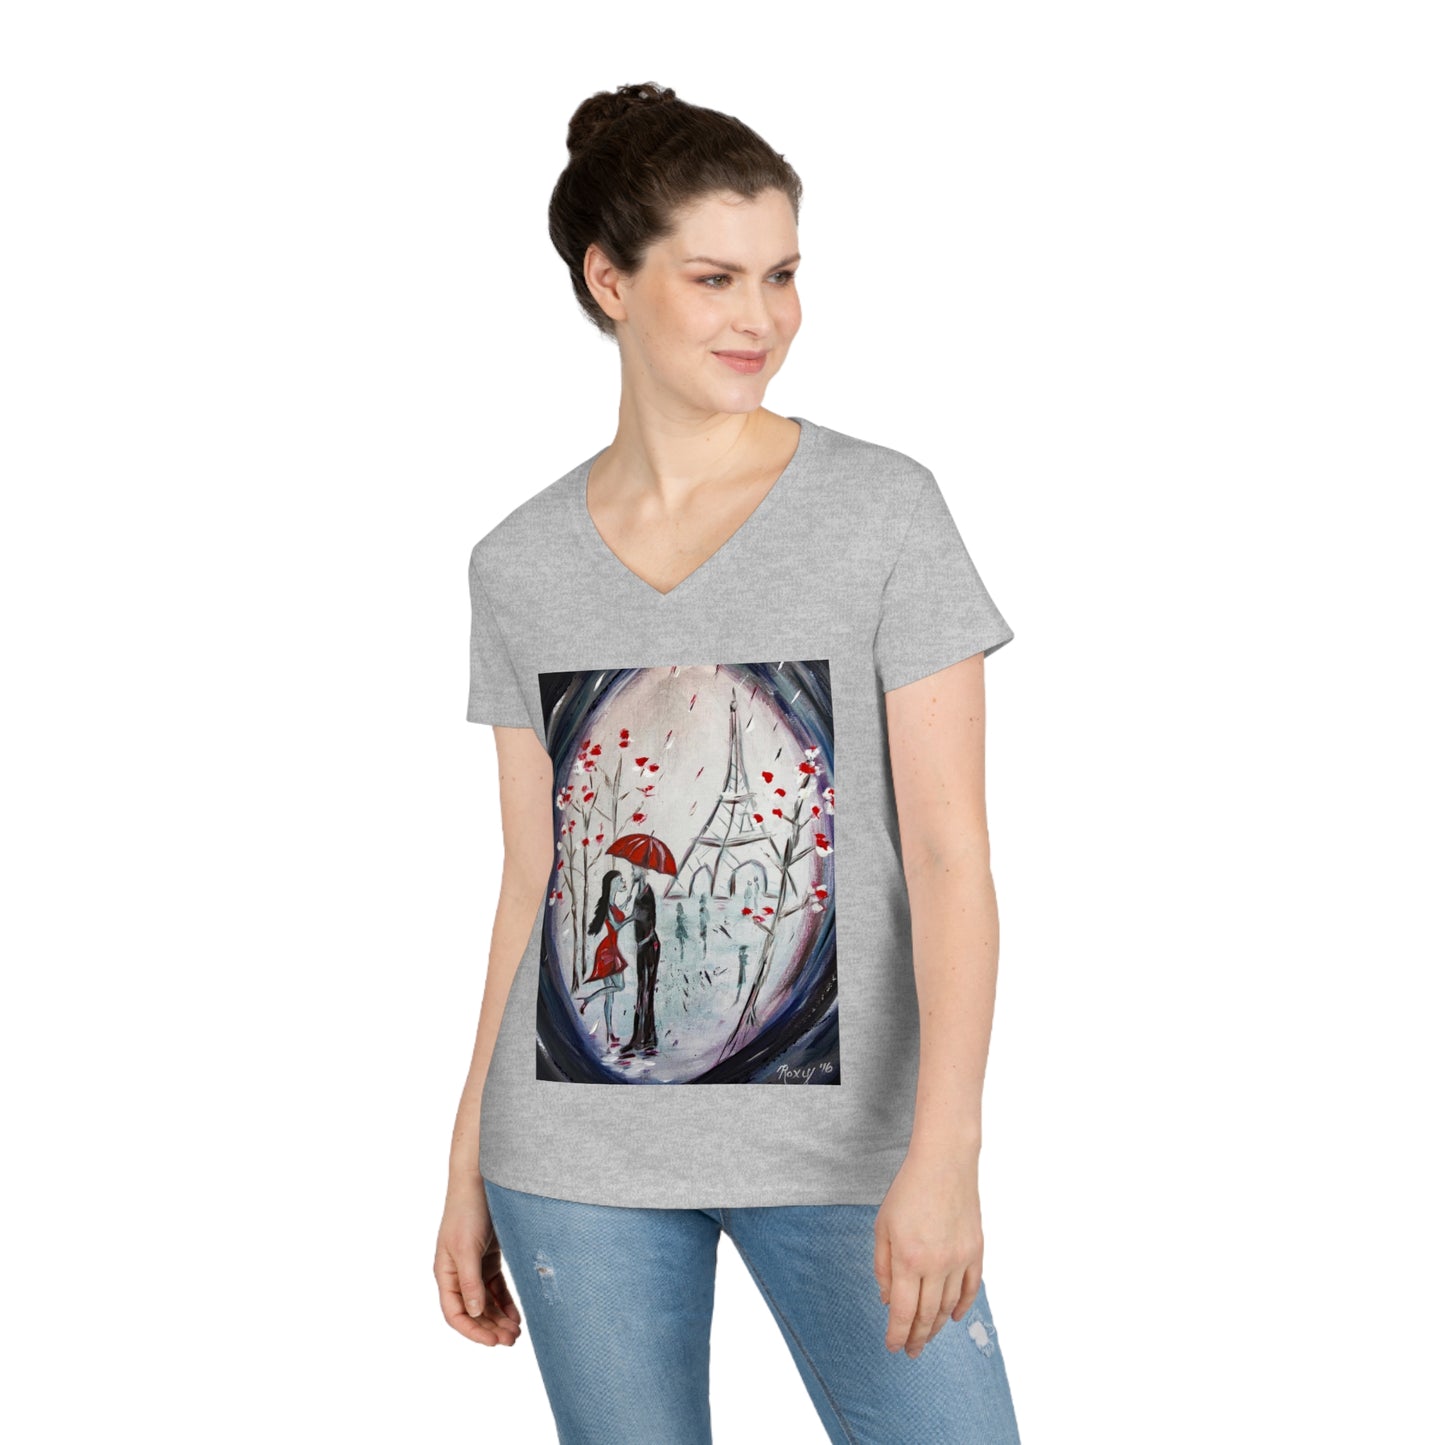 Romantic Couple in Paris "I only have eyes for you" Ladies' V-Neck T-Shirt